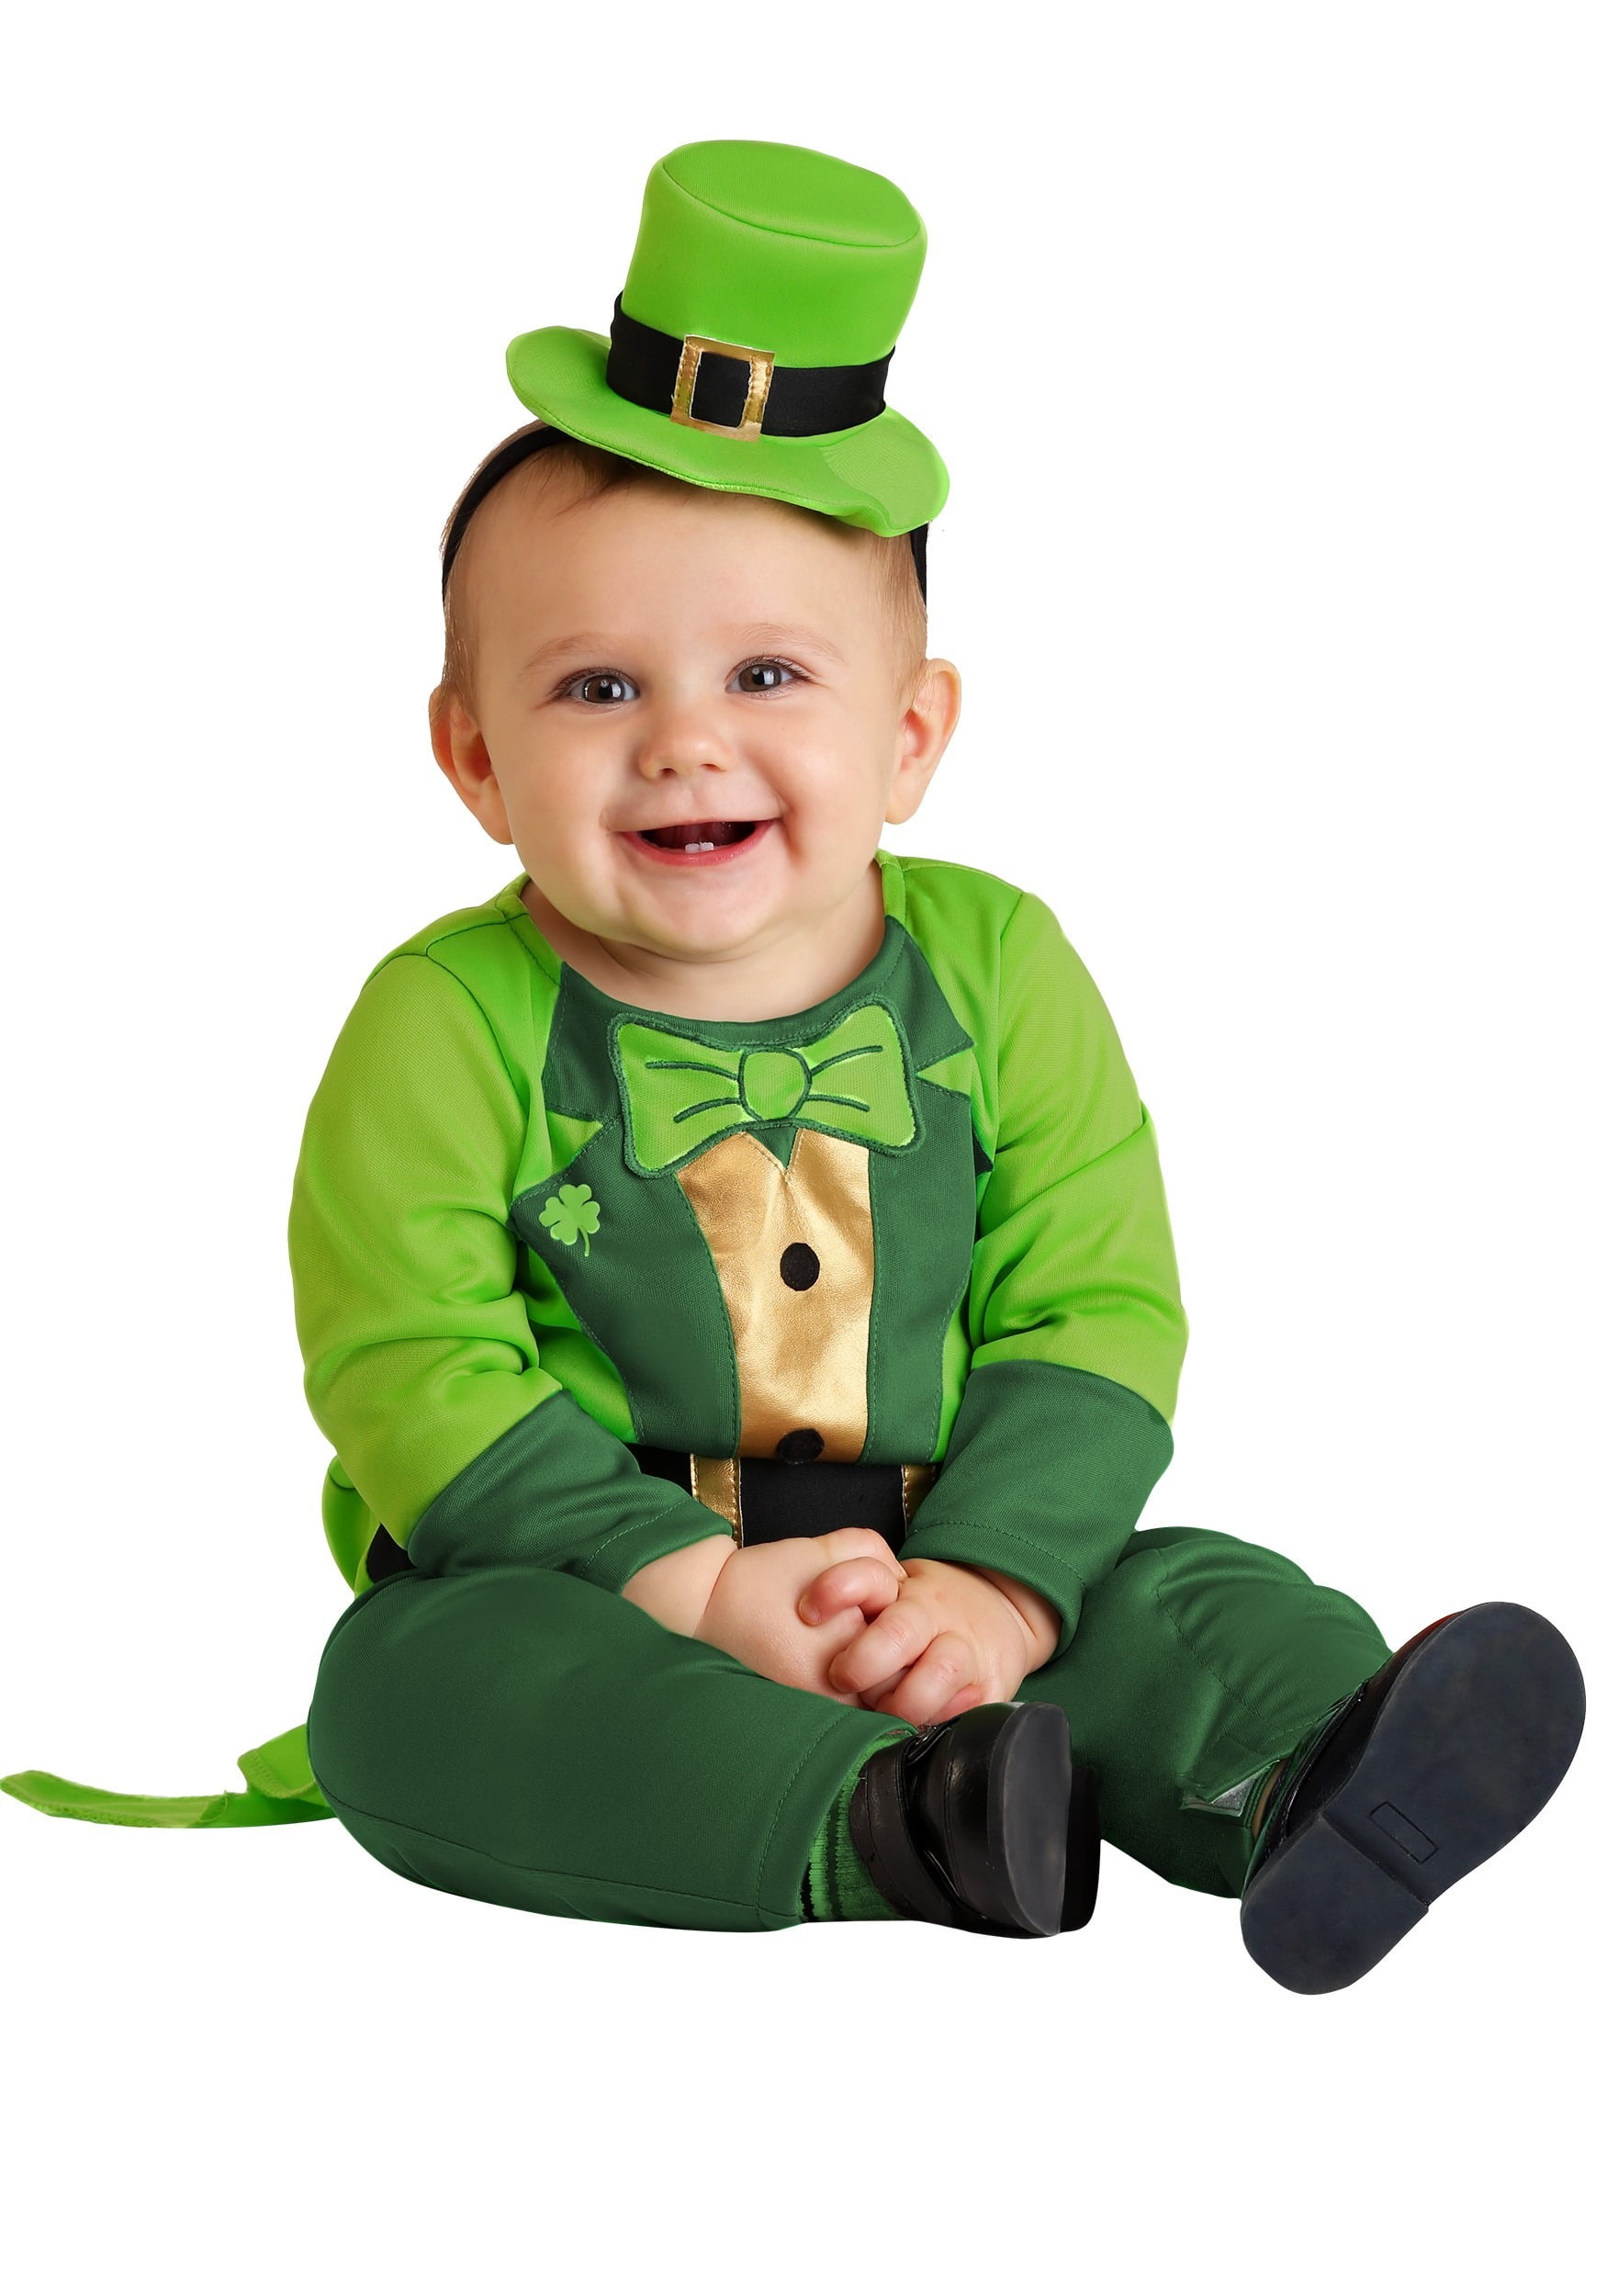 California Costumes Baby Boys Lil Knight Infant